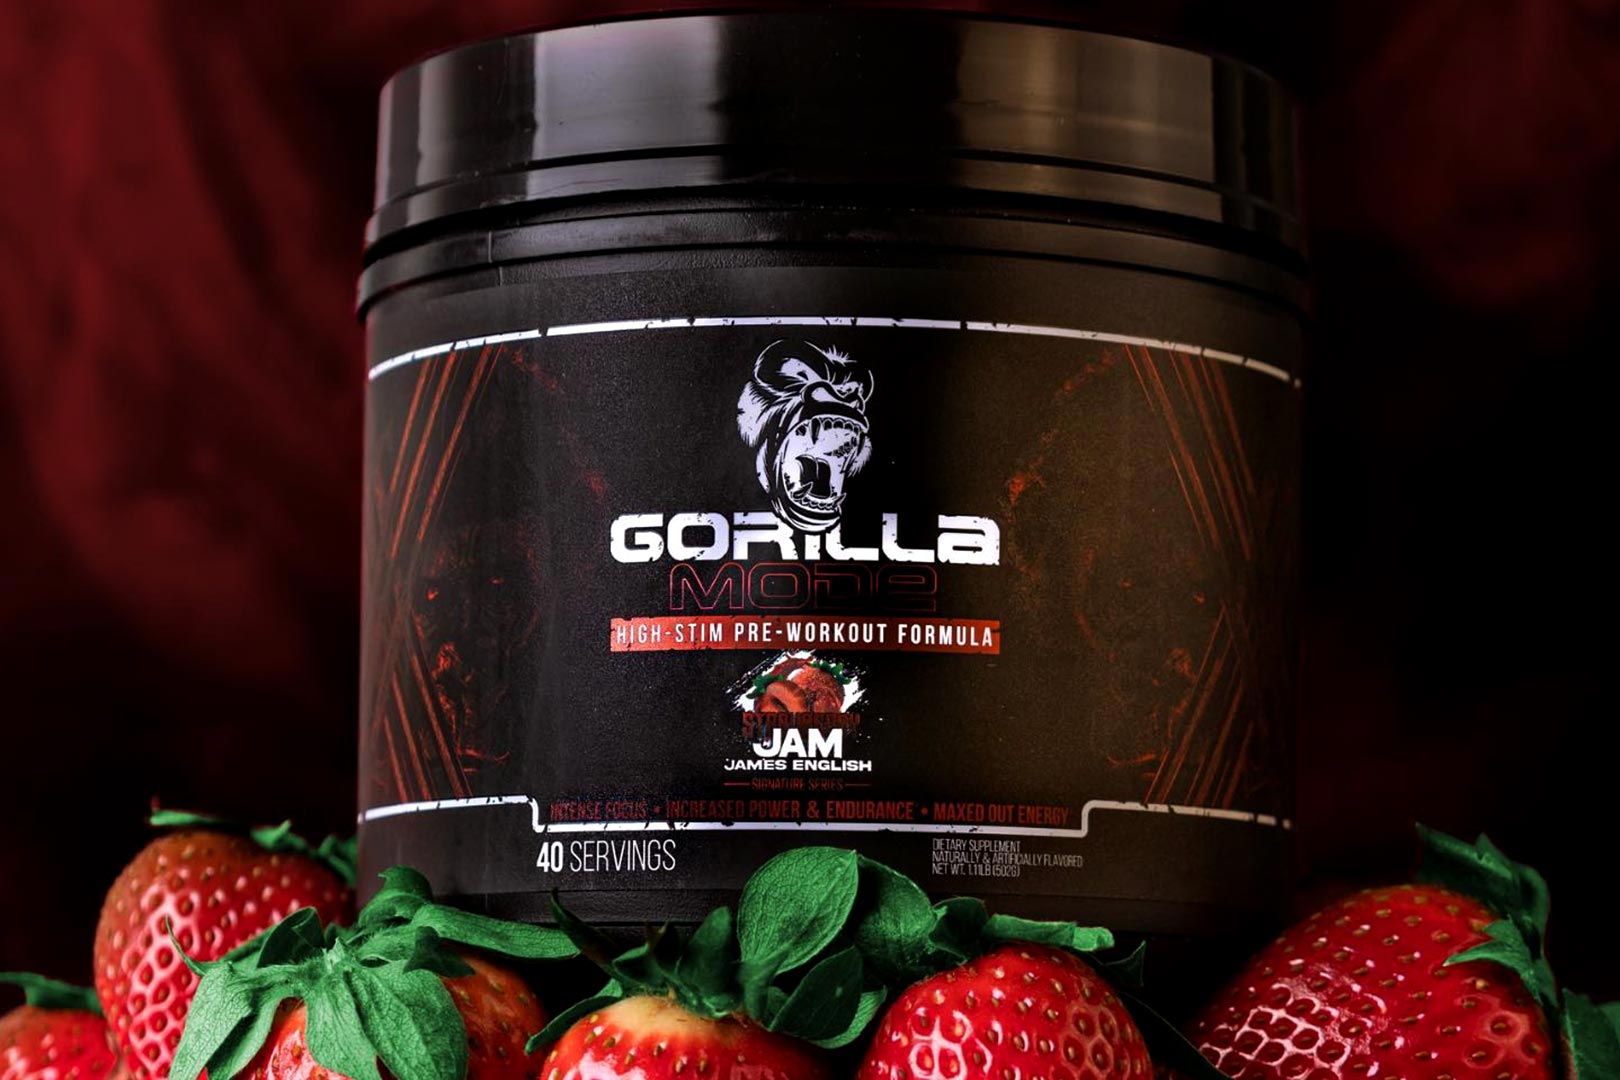 High-stim Gorilla Mode combines 550mg of caffeine and a few other energy and focus features